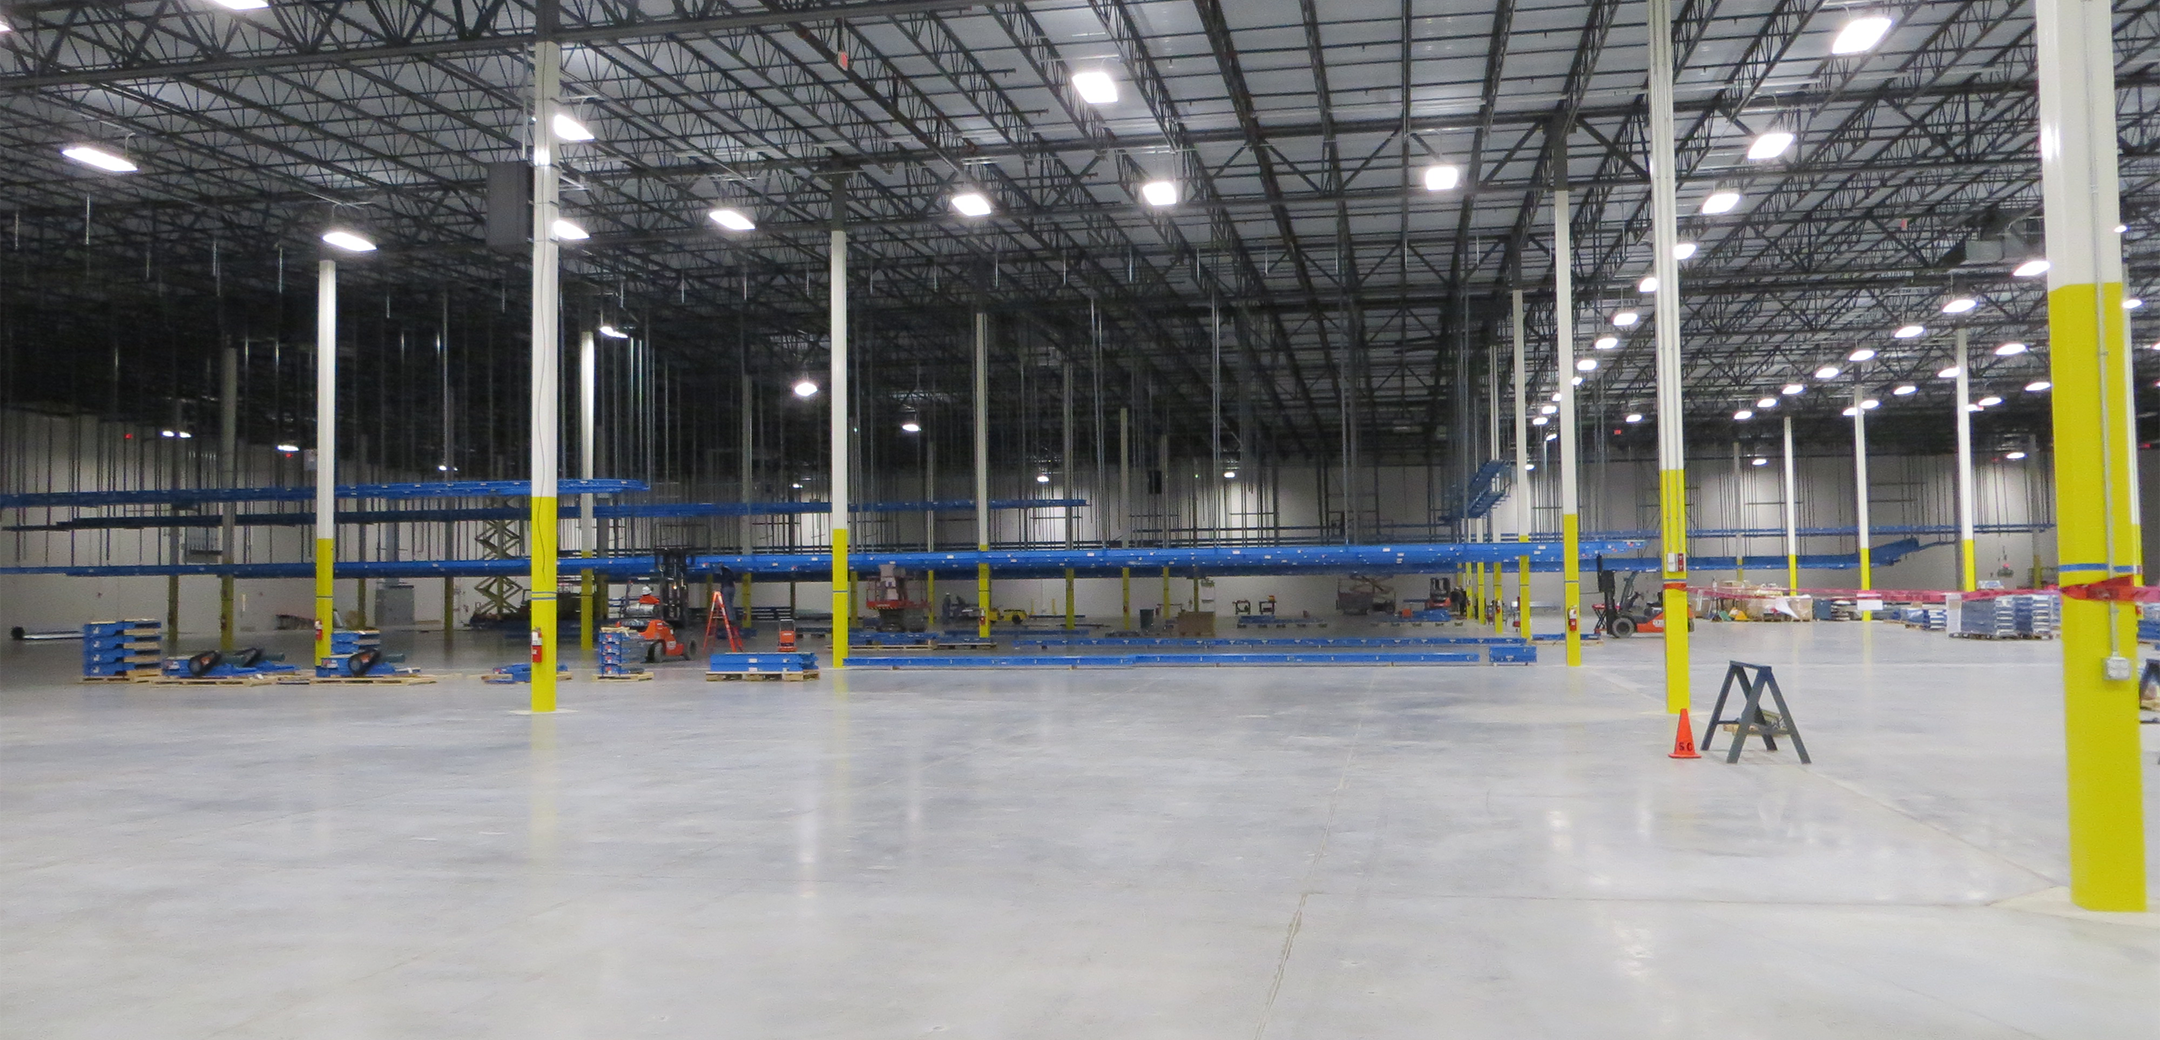 An interior view of the Project Liberty Distribution warehouse with thin support pillars, high industrial ceiling and half constructed shelves in the back.